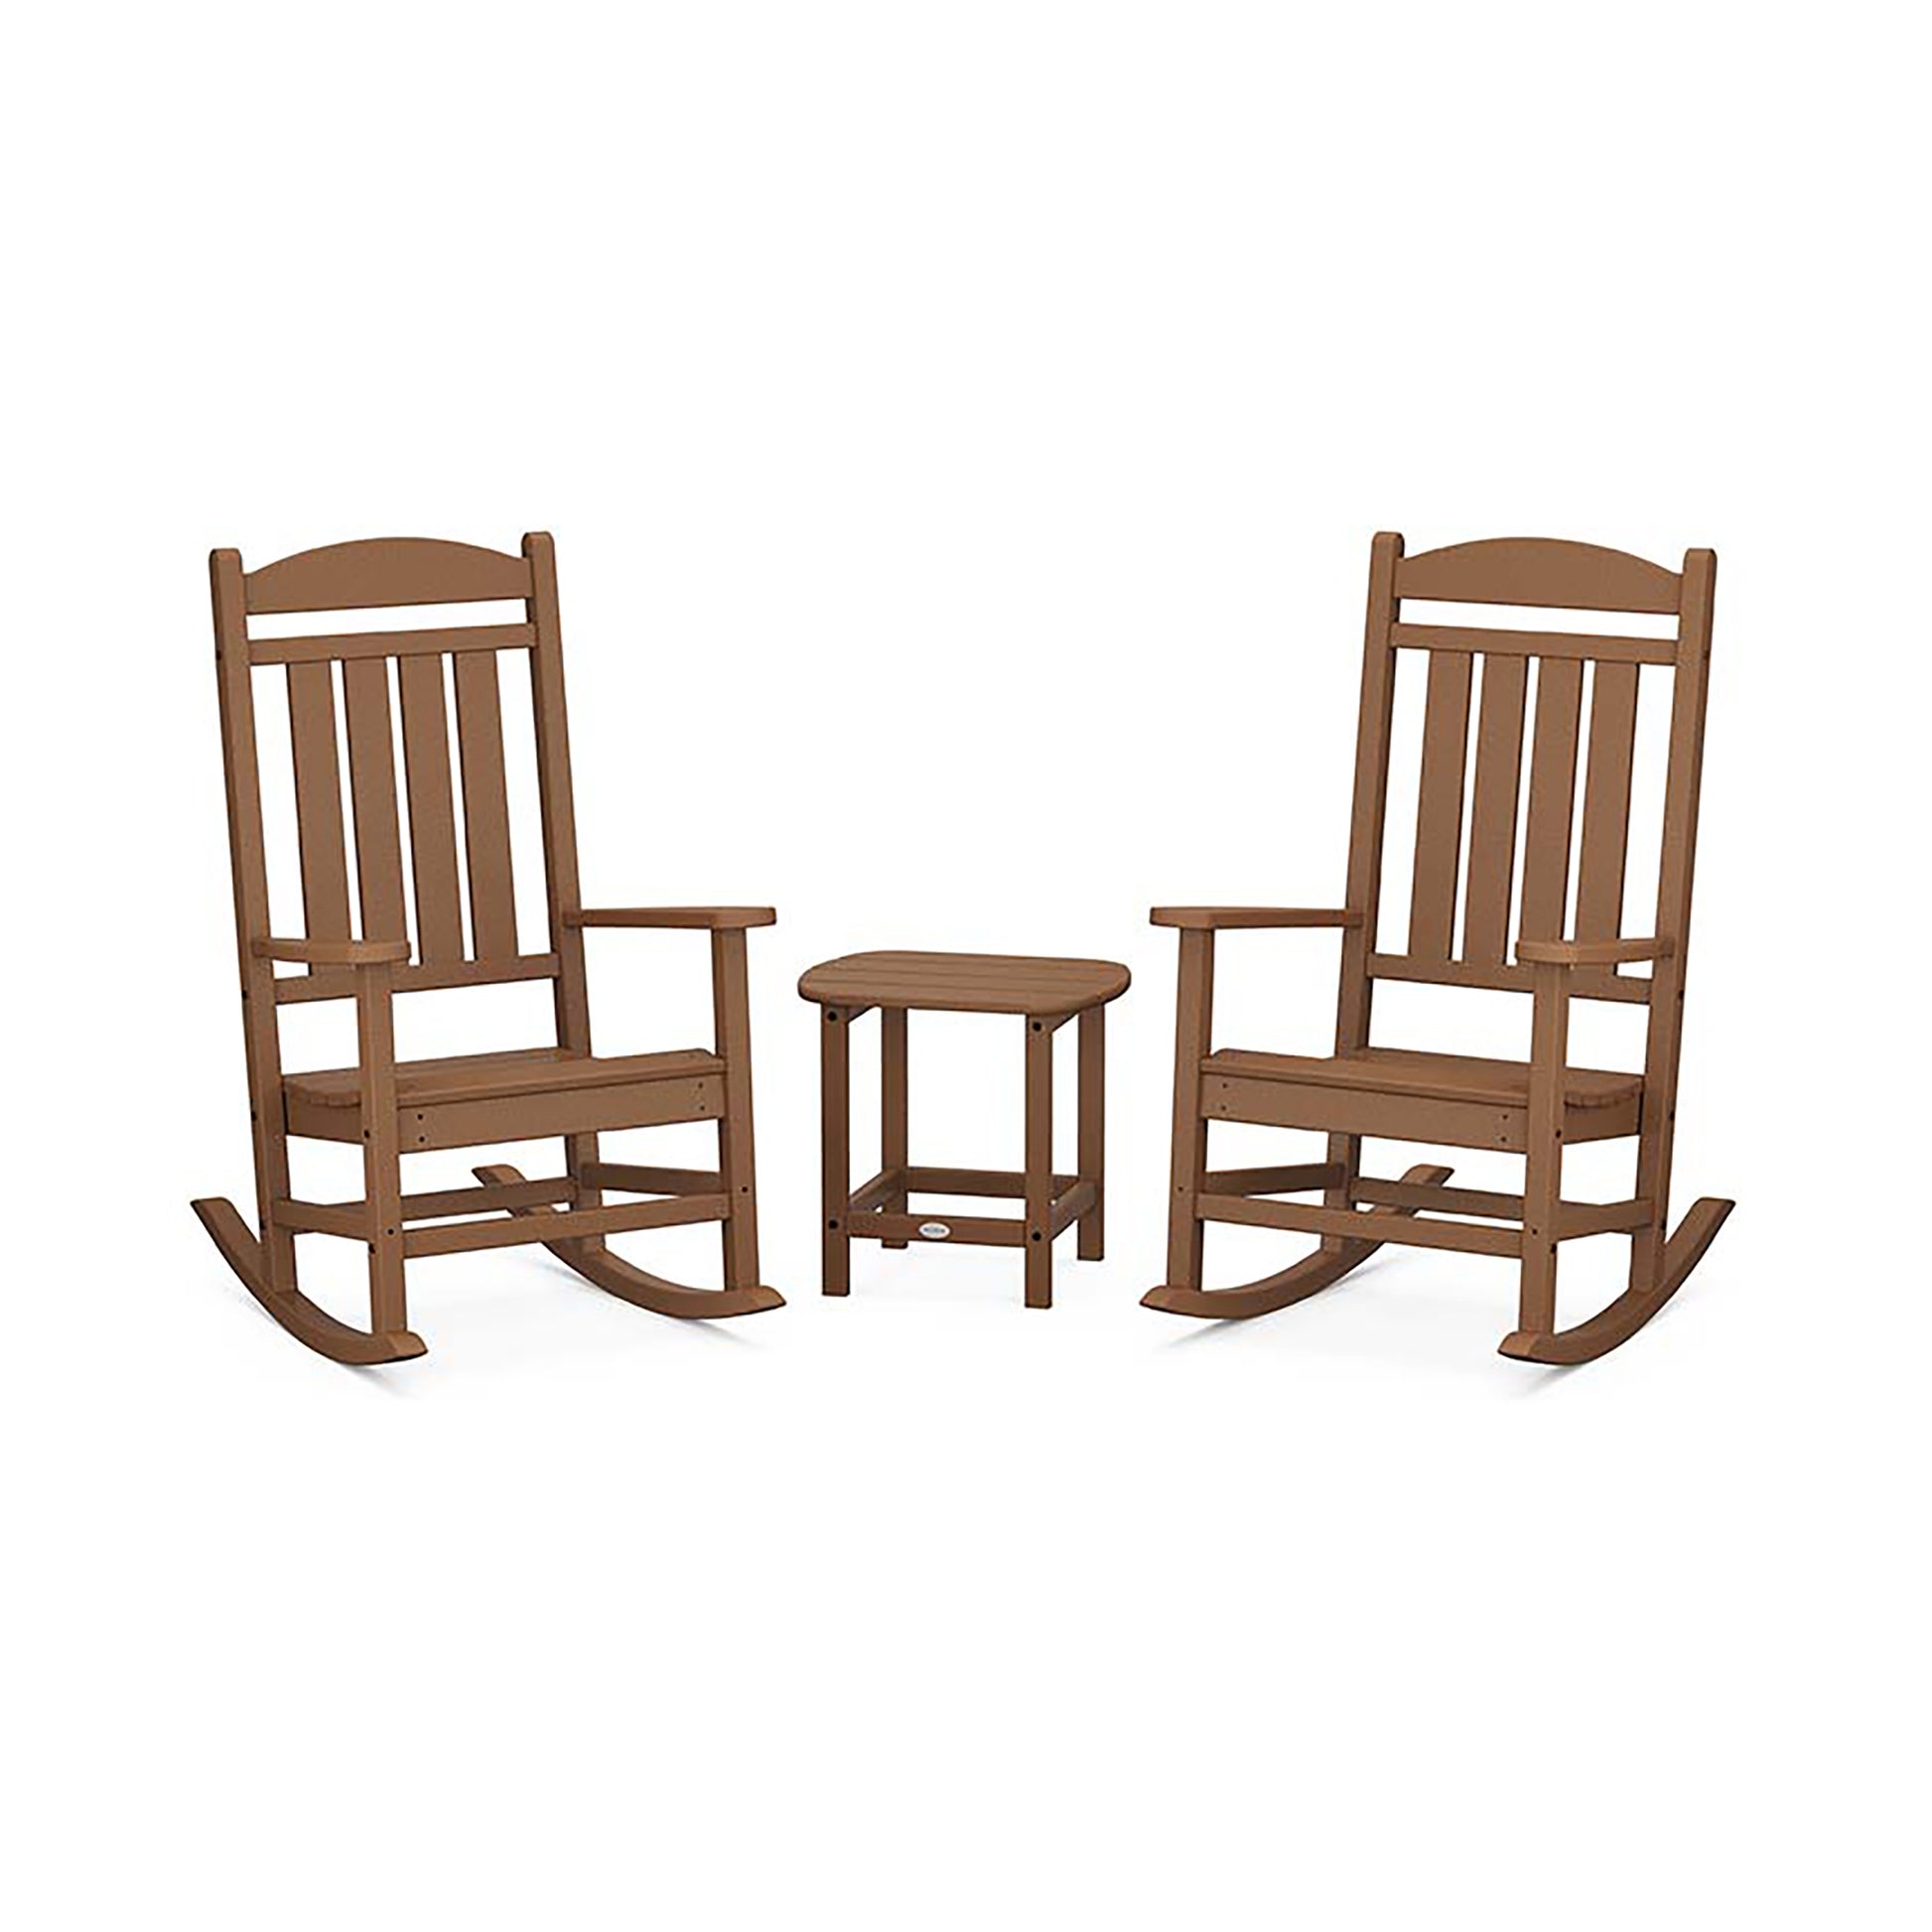 Two POLYWOOD Presidential Outdoor Rocking Chair 3-Piece Sets facing each other with a small round stool placed in between them, set against a plain white background.